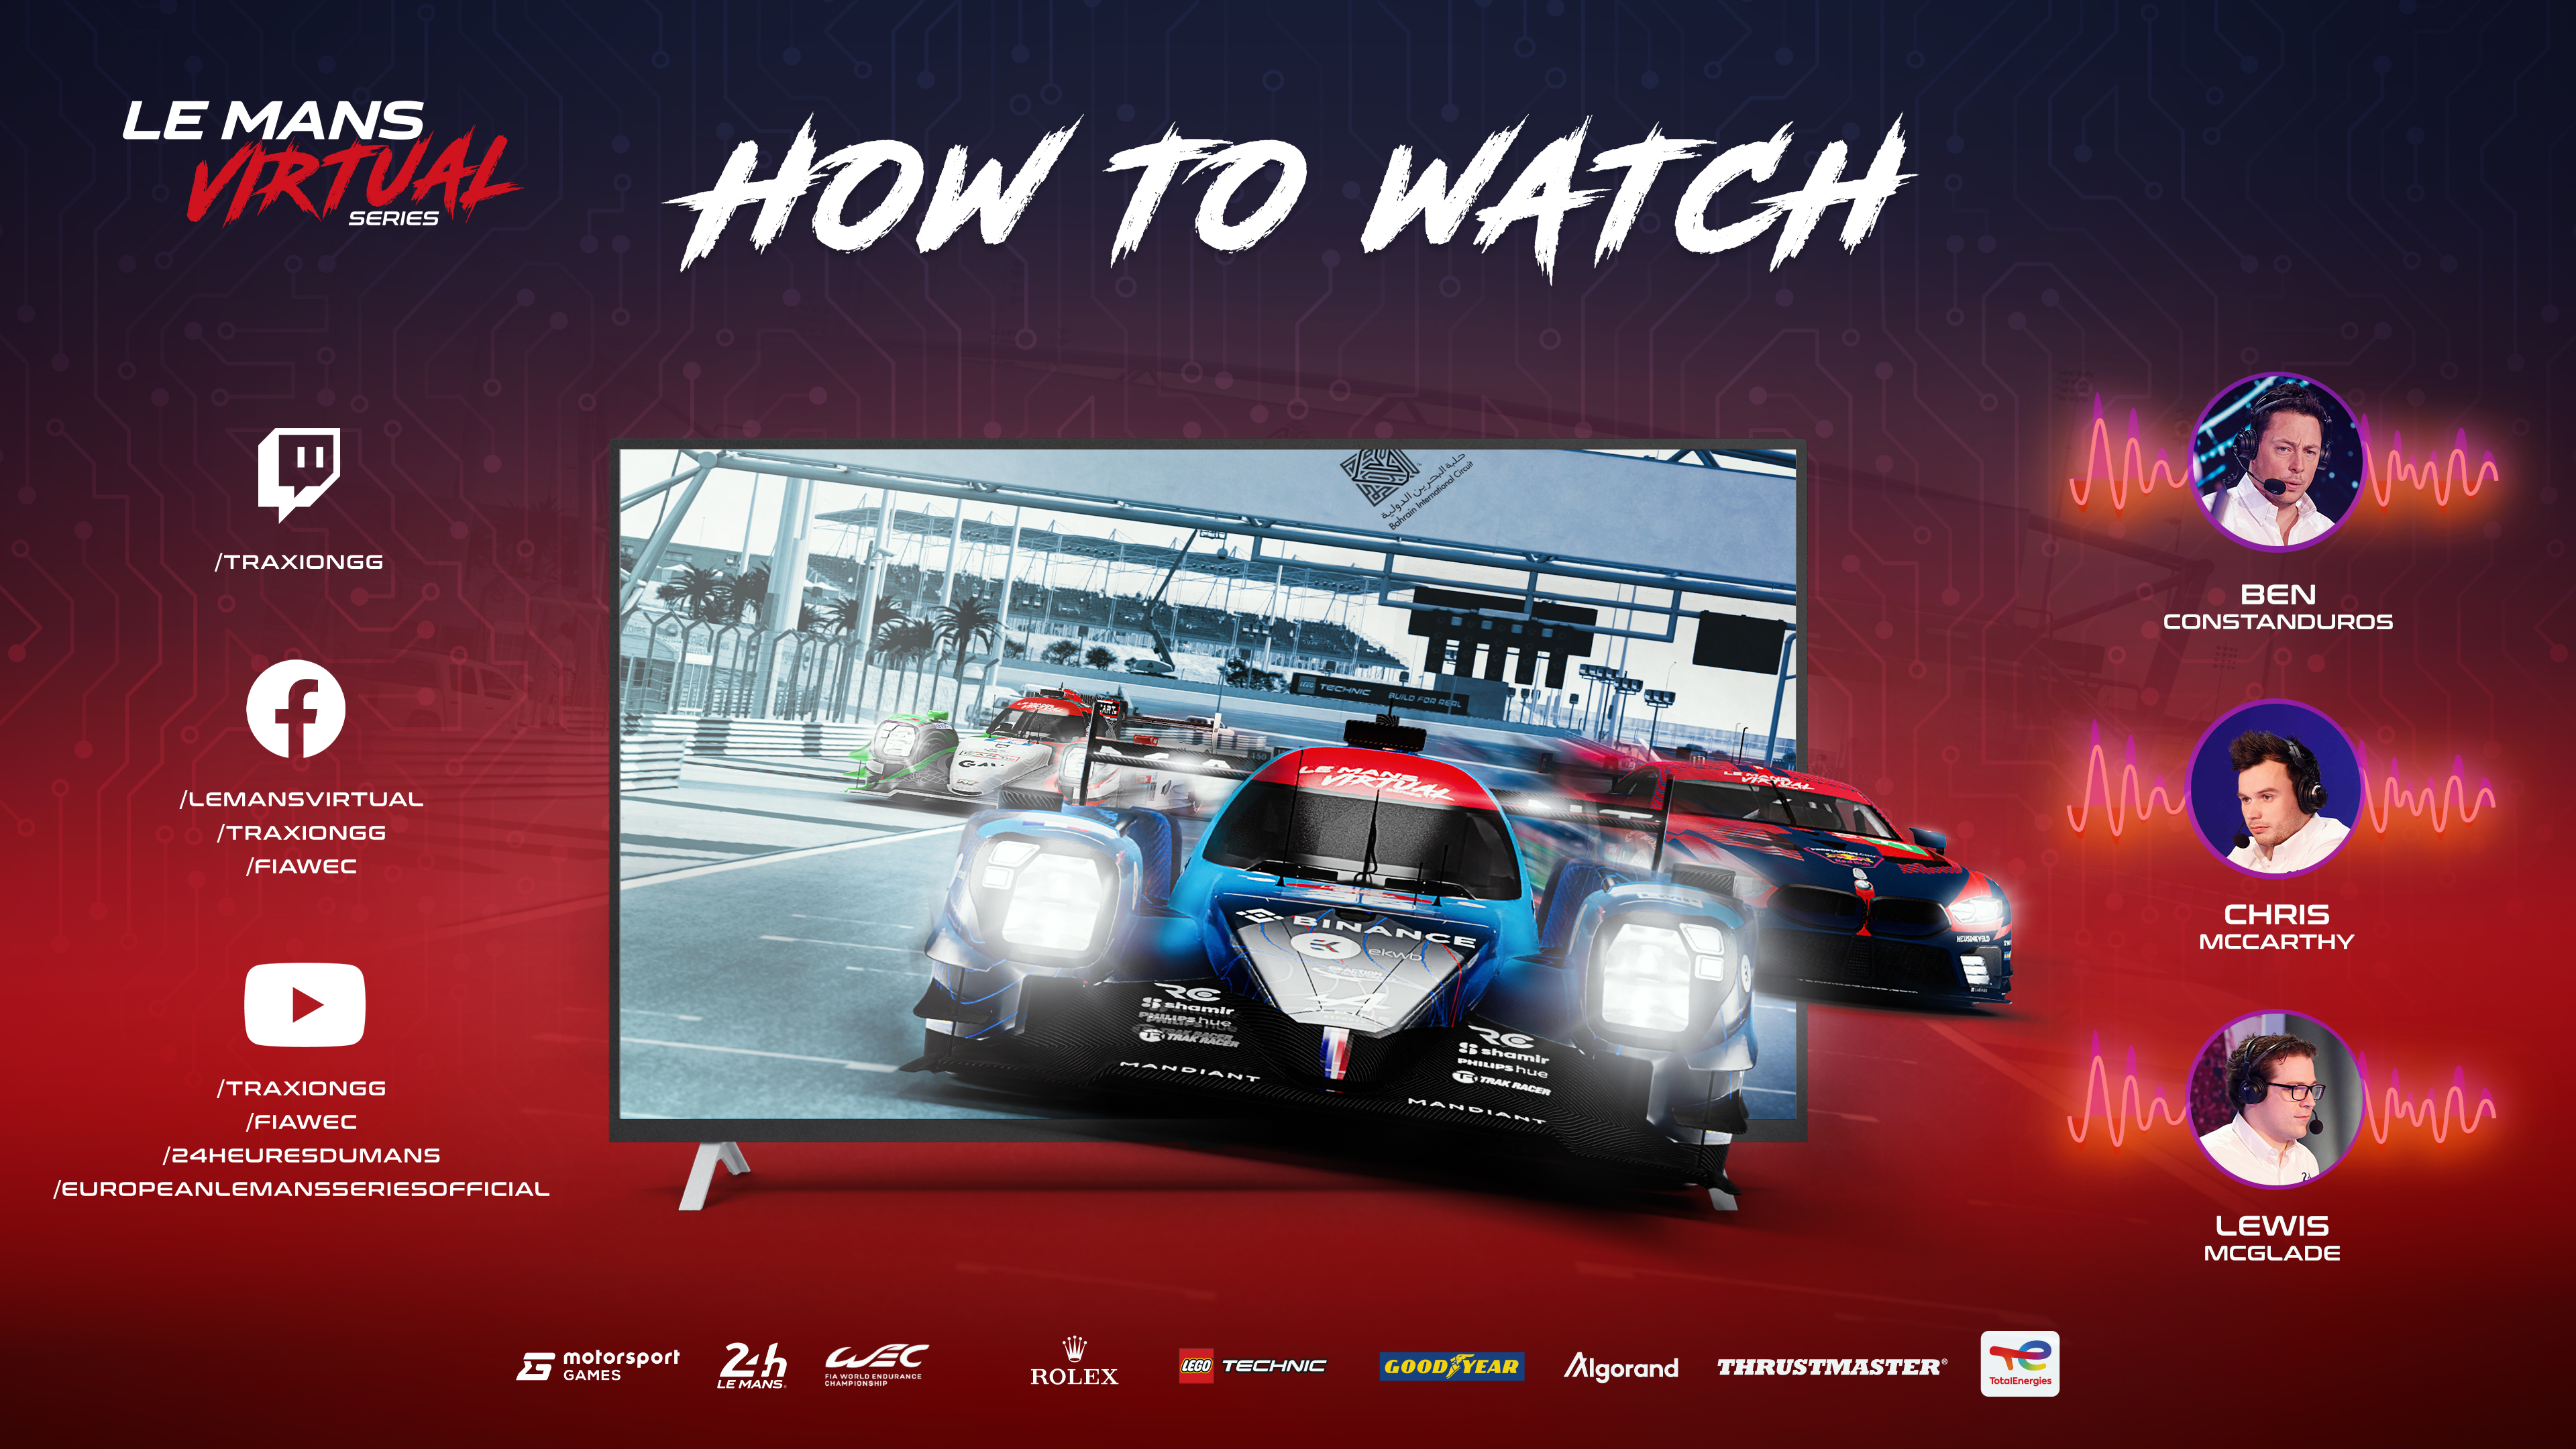 The 2022 FIA World Endurance Championship, Season In Review On Video